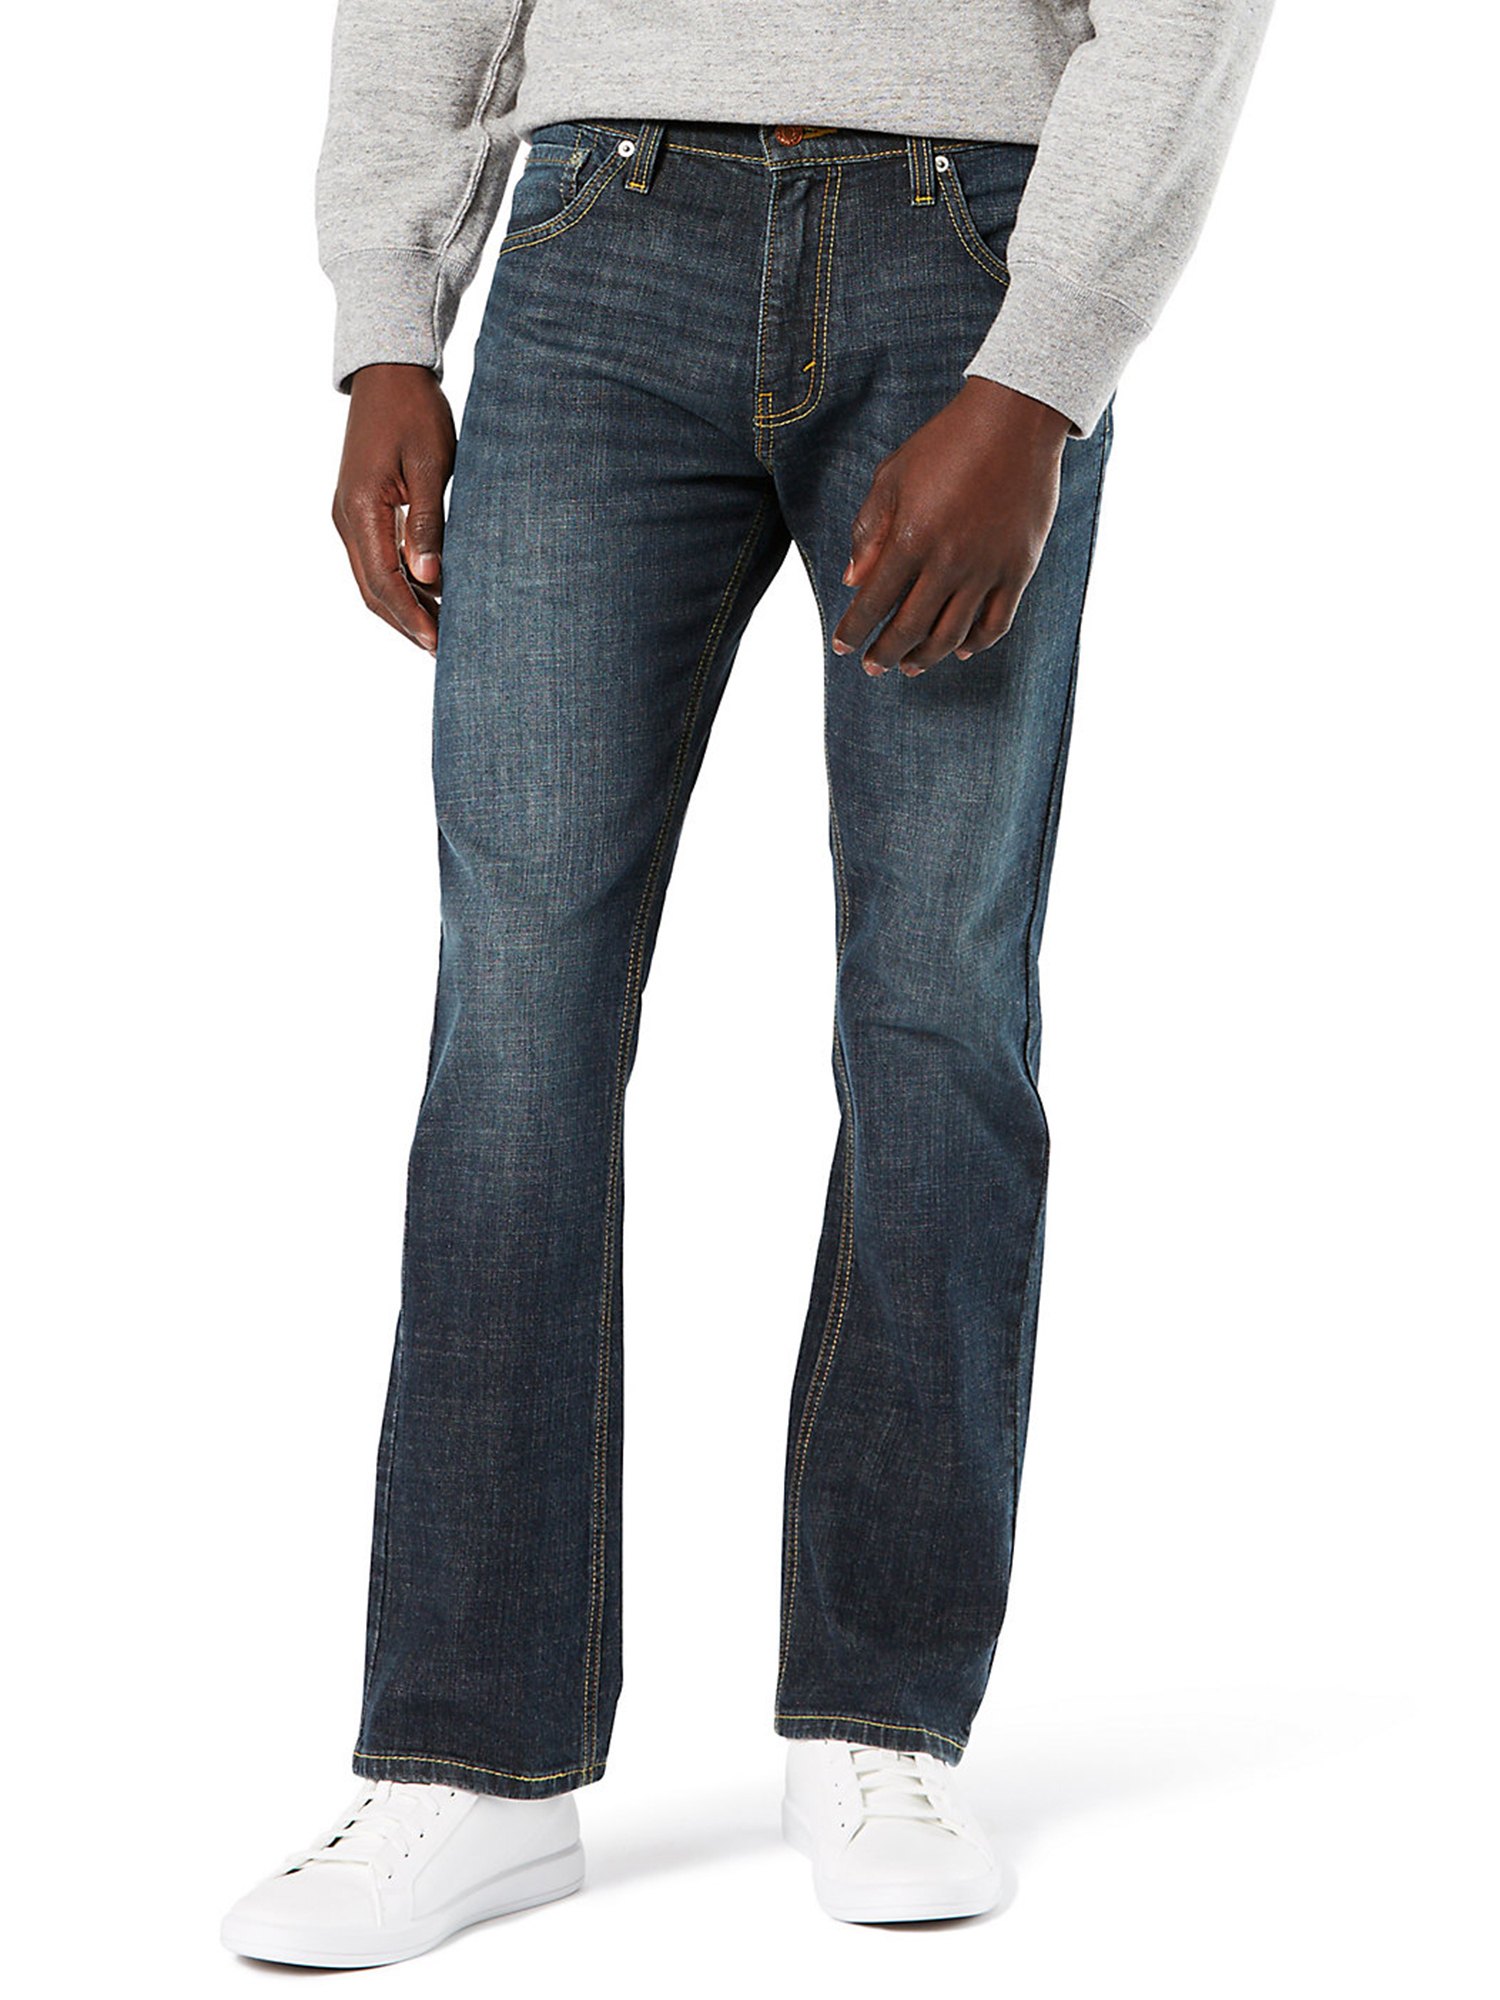 Signature by Levi Strauss & Co. Men's and Big and Tall Bootcut Jeans - image 1 of 10